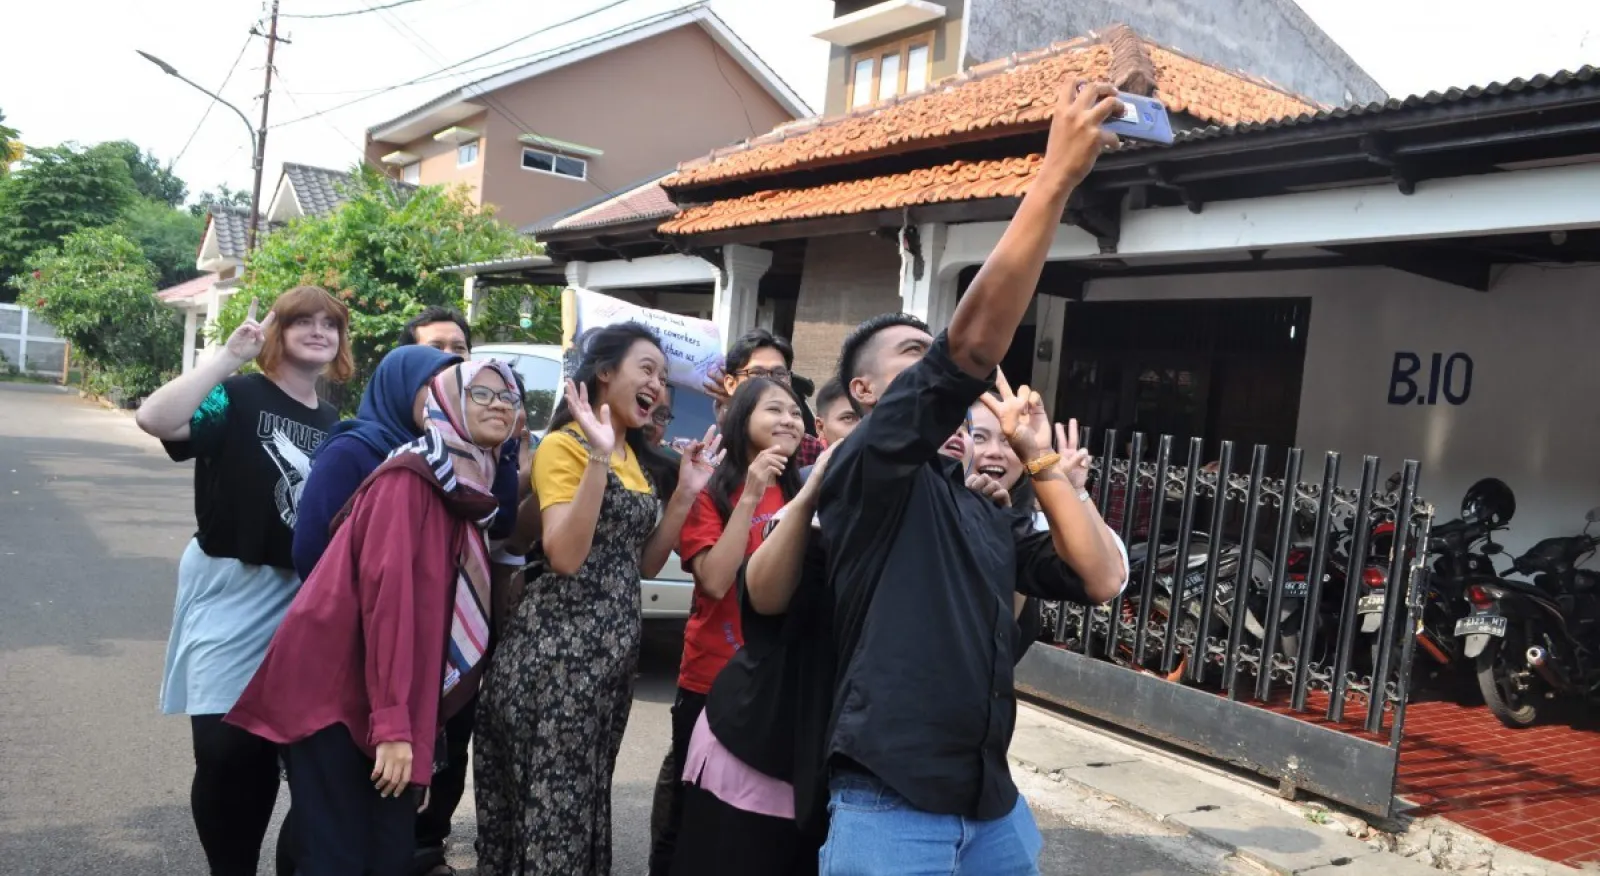 a group of people pose for a selfie in a suburban street setting.